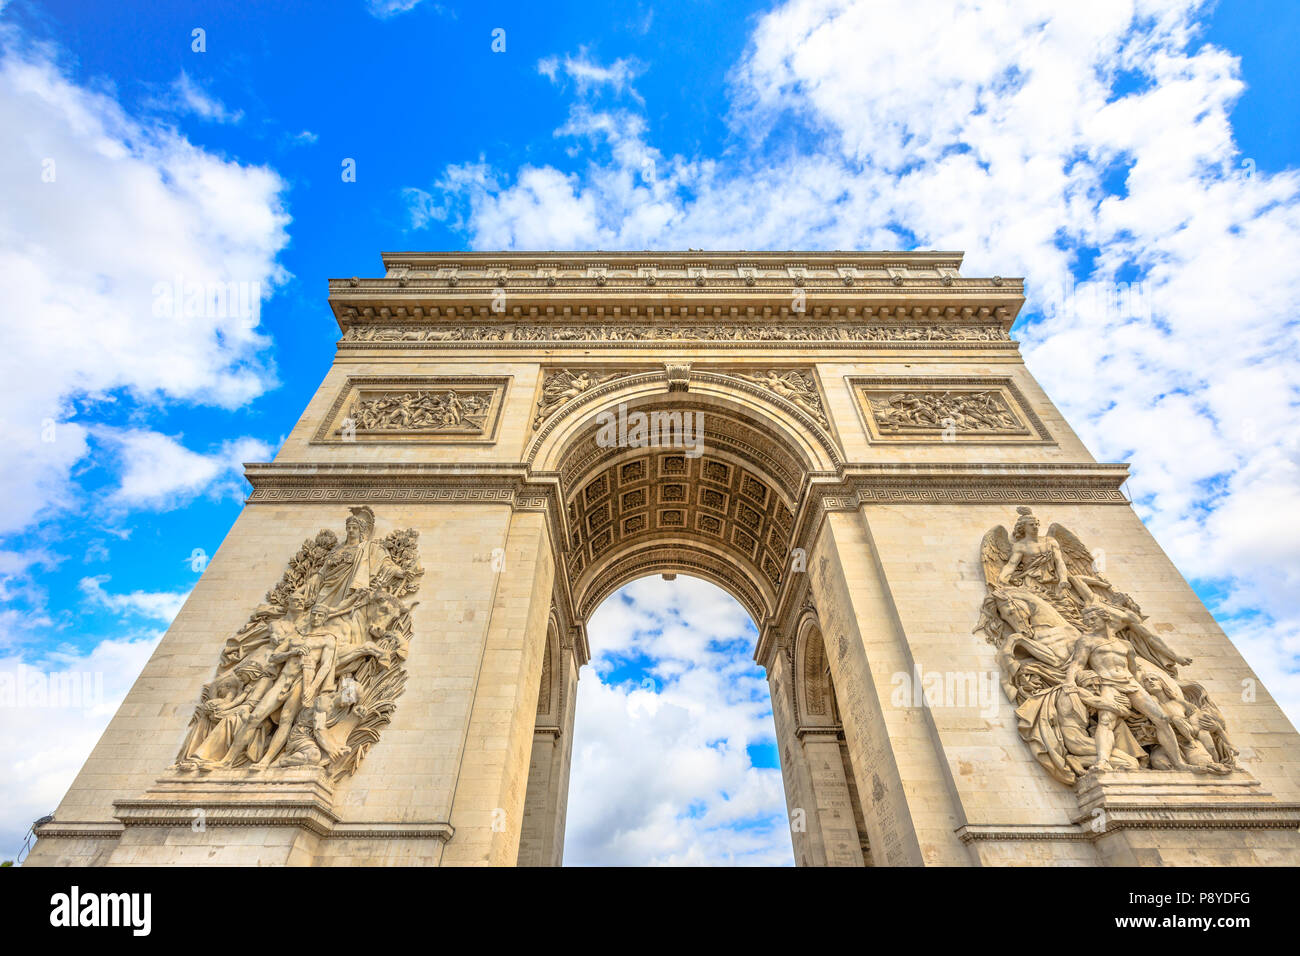 Bottom view of Arch of Triumph at center of Place Charles de Gaulle with clouds and blue sky. Popular landmark and famous tourist attraction in Paris capital of France in Europe. Stock Photo